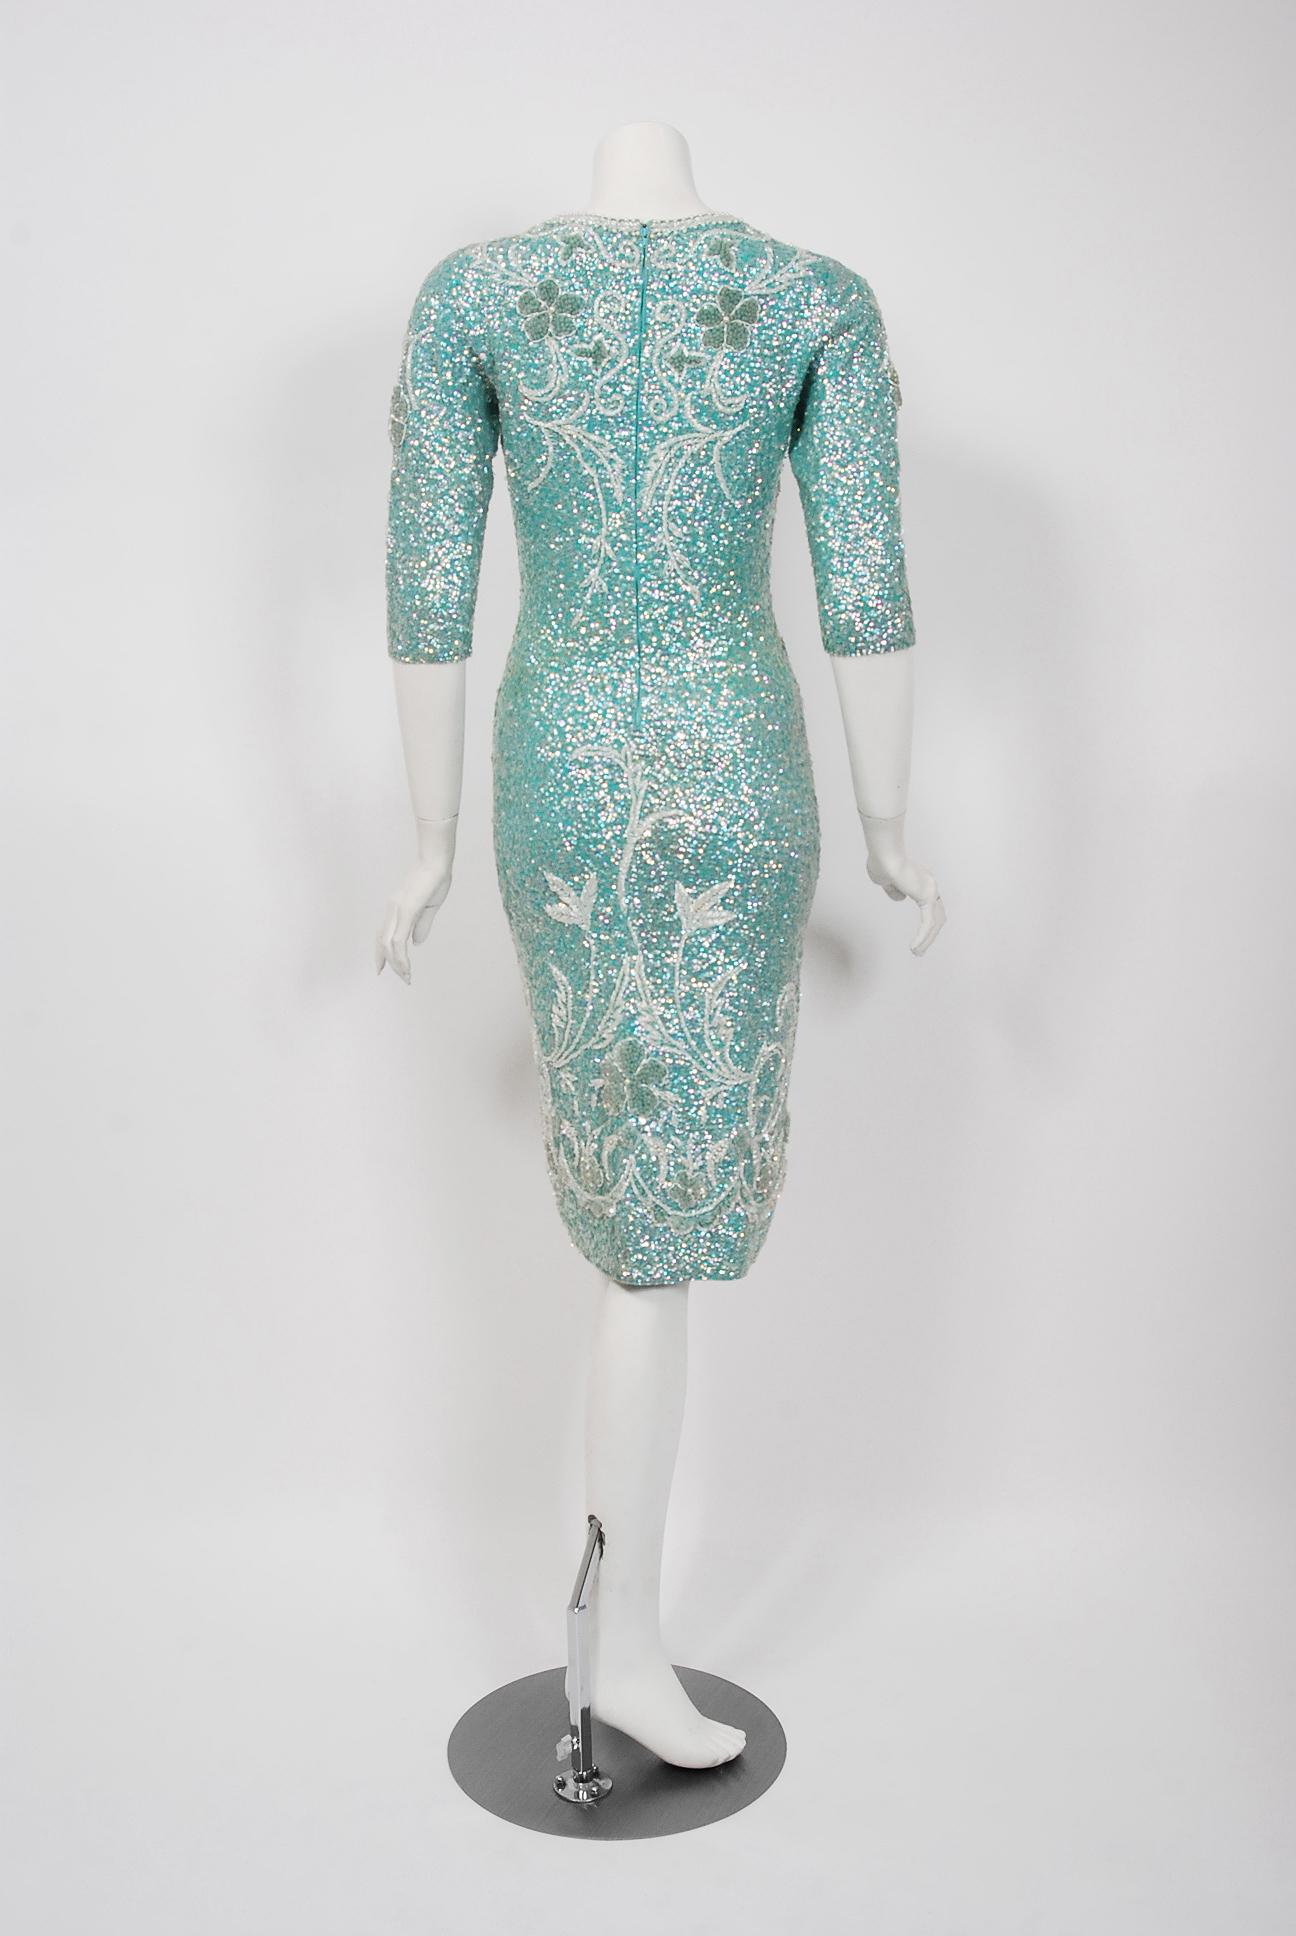 Women's Vintage 1950's Gene Shelly Sequin Beaded Floral Turquoise Knit Hourglass Dress